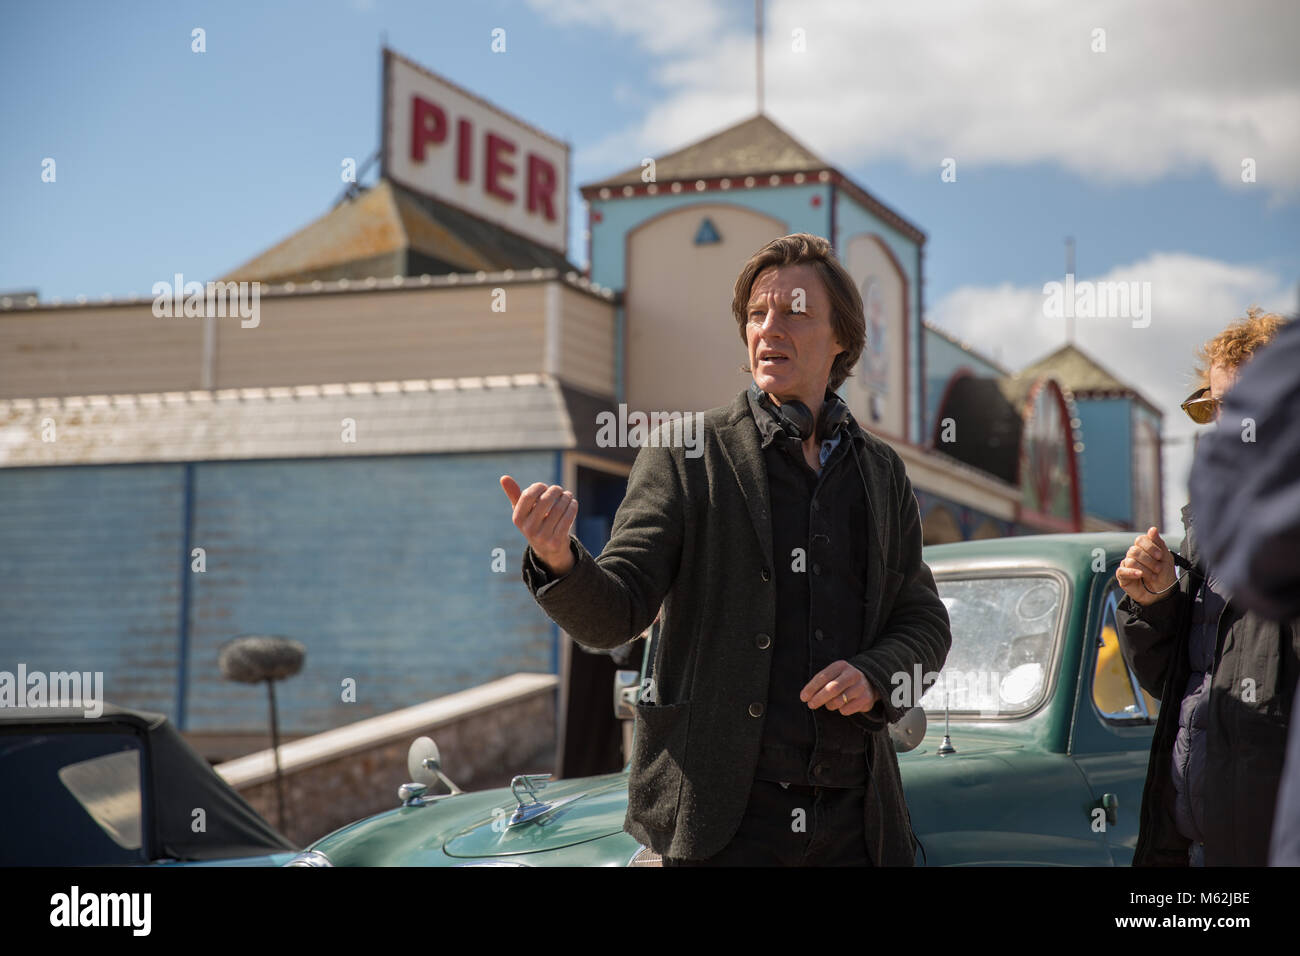 RELEASE DATE: 2018 TITLE: The Mercy STUDIO: Lionsgate DIRECTOR: James Marsh PLOT: Yachtsman Donald Crowhurst's disastrous attempt to win the 1968 Golden Globe Race ends up with him creating an outrageous account of traveling the world alone by sea. STARRING: JAMES MARSH on set. (Credit Image: © Lionsgate/Entertainment Pictures) Stock Photo